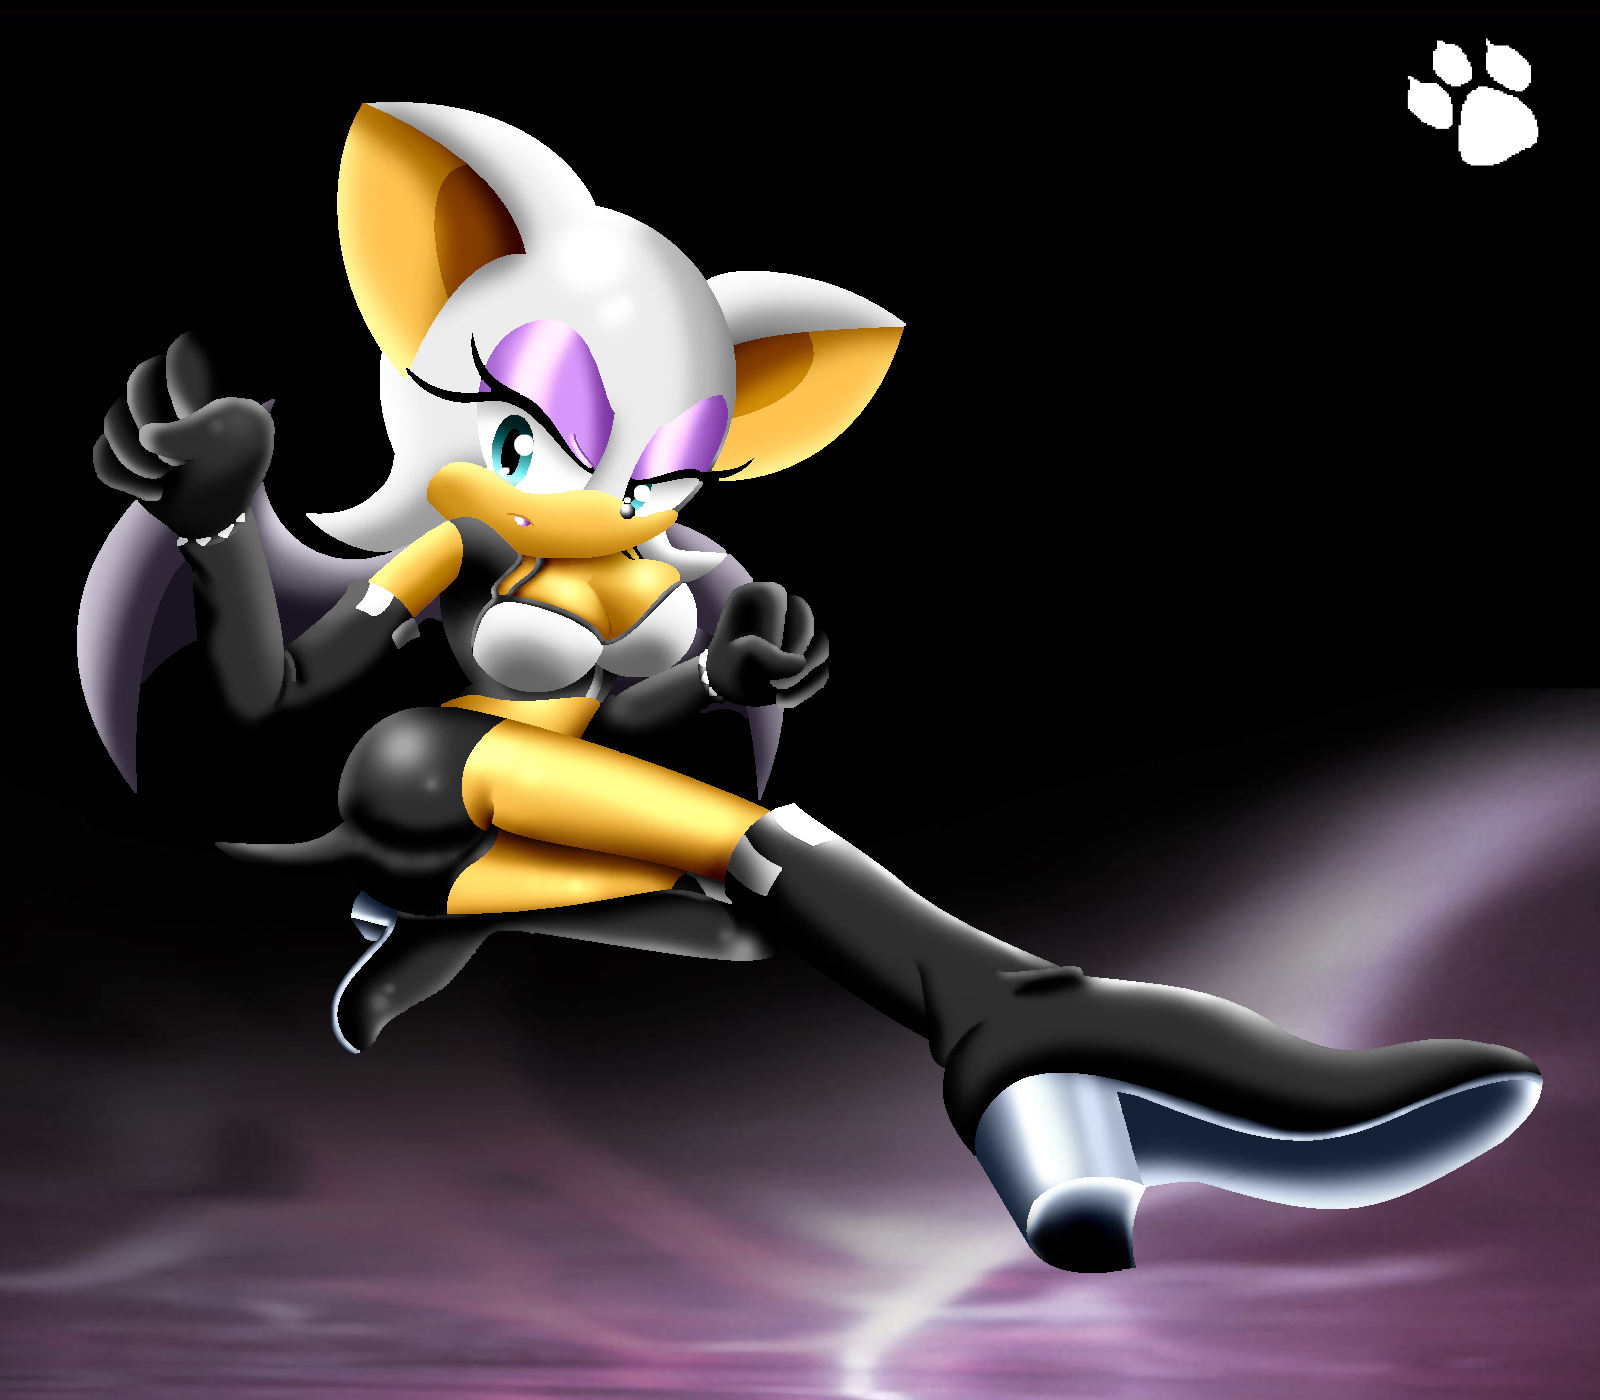 Rouge Is So Sexy Image Attack HD Wallpaper And Background